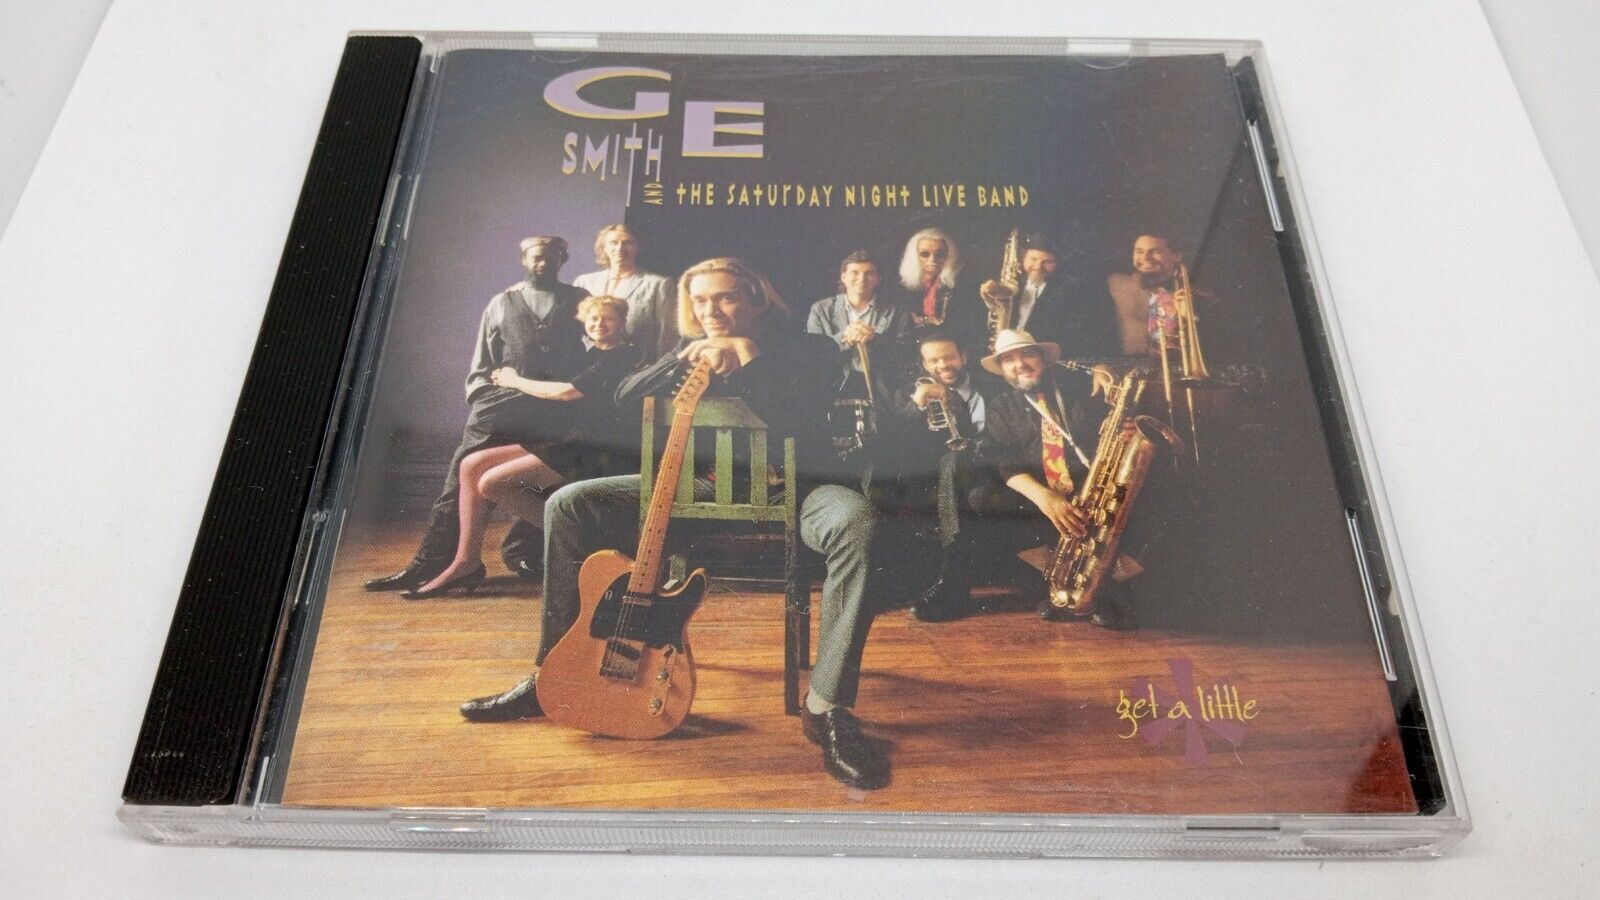 GE Smith & The Saturday Night Live Band Get A Little CD  D100227 1992 No IFPI